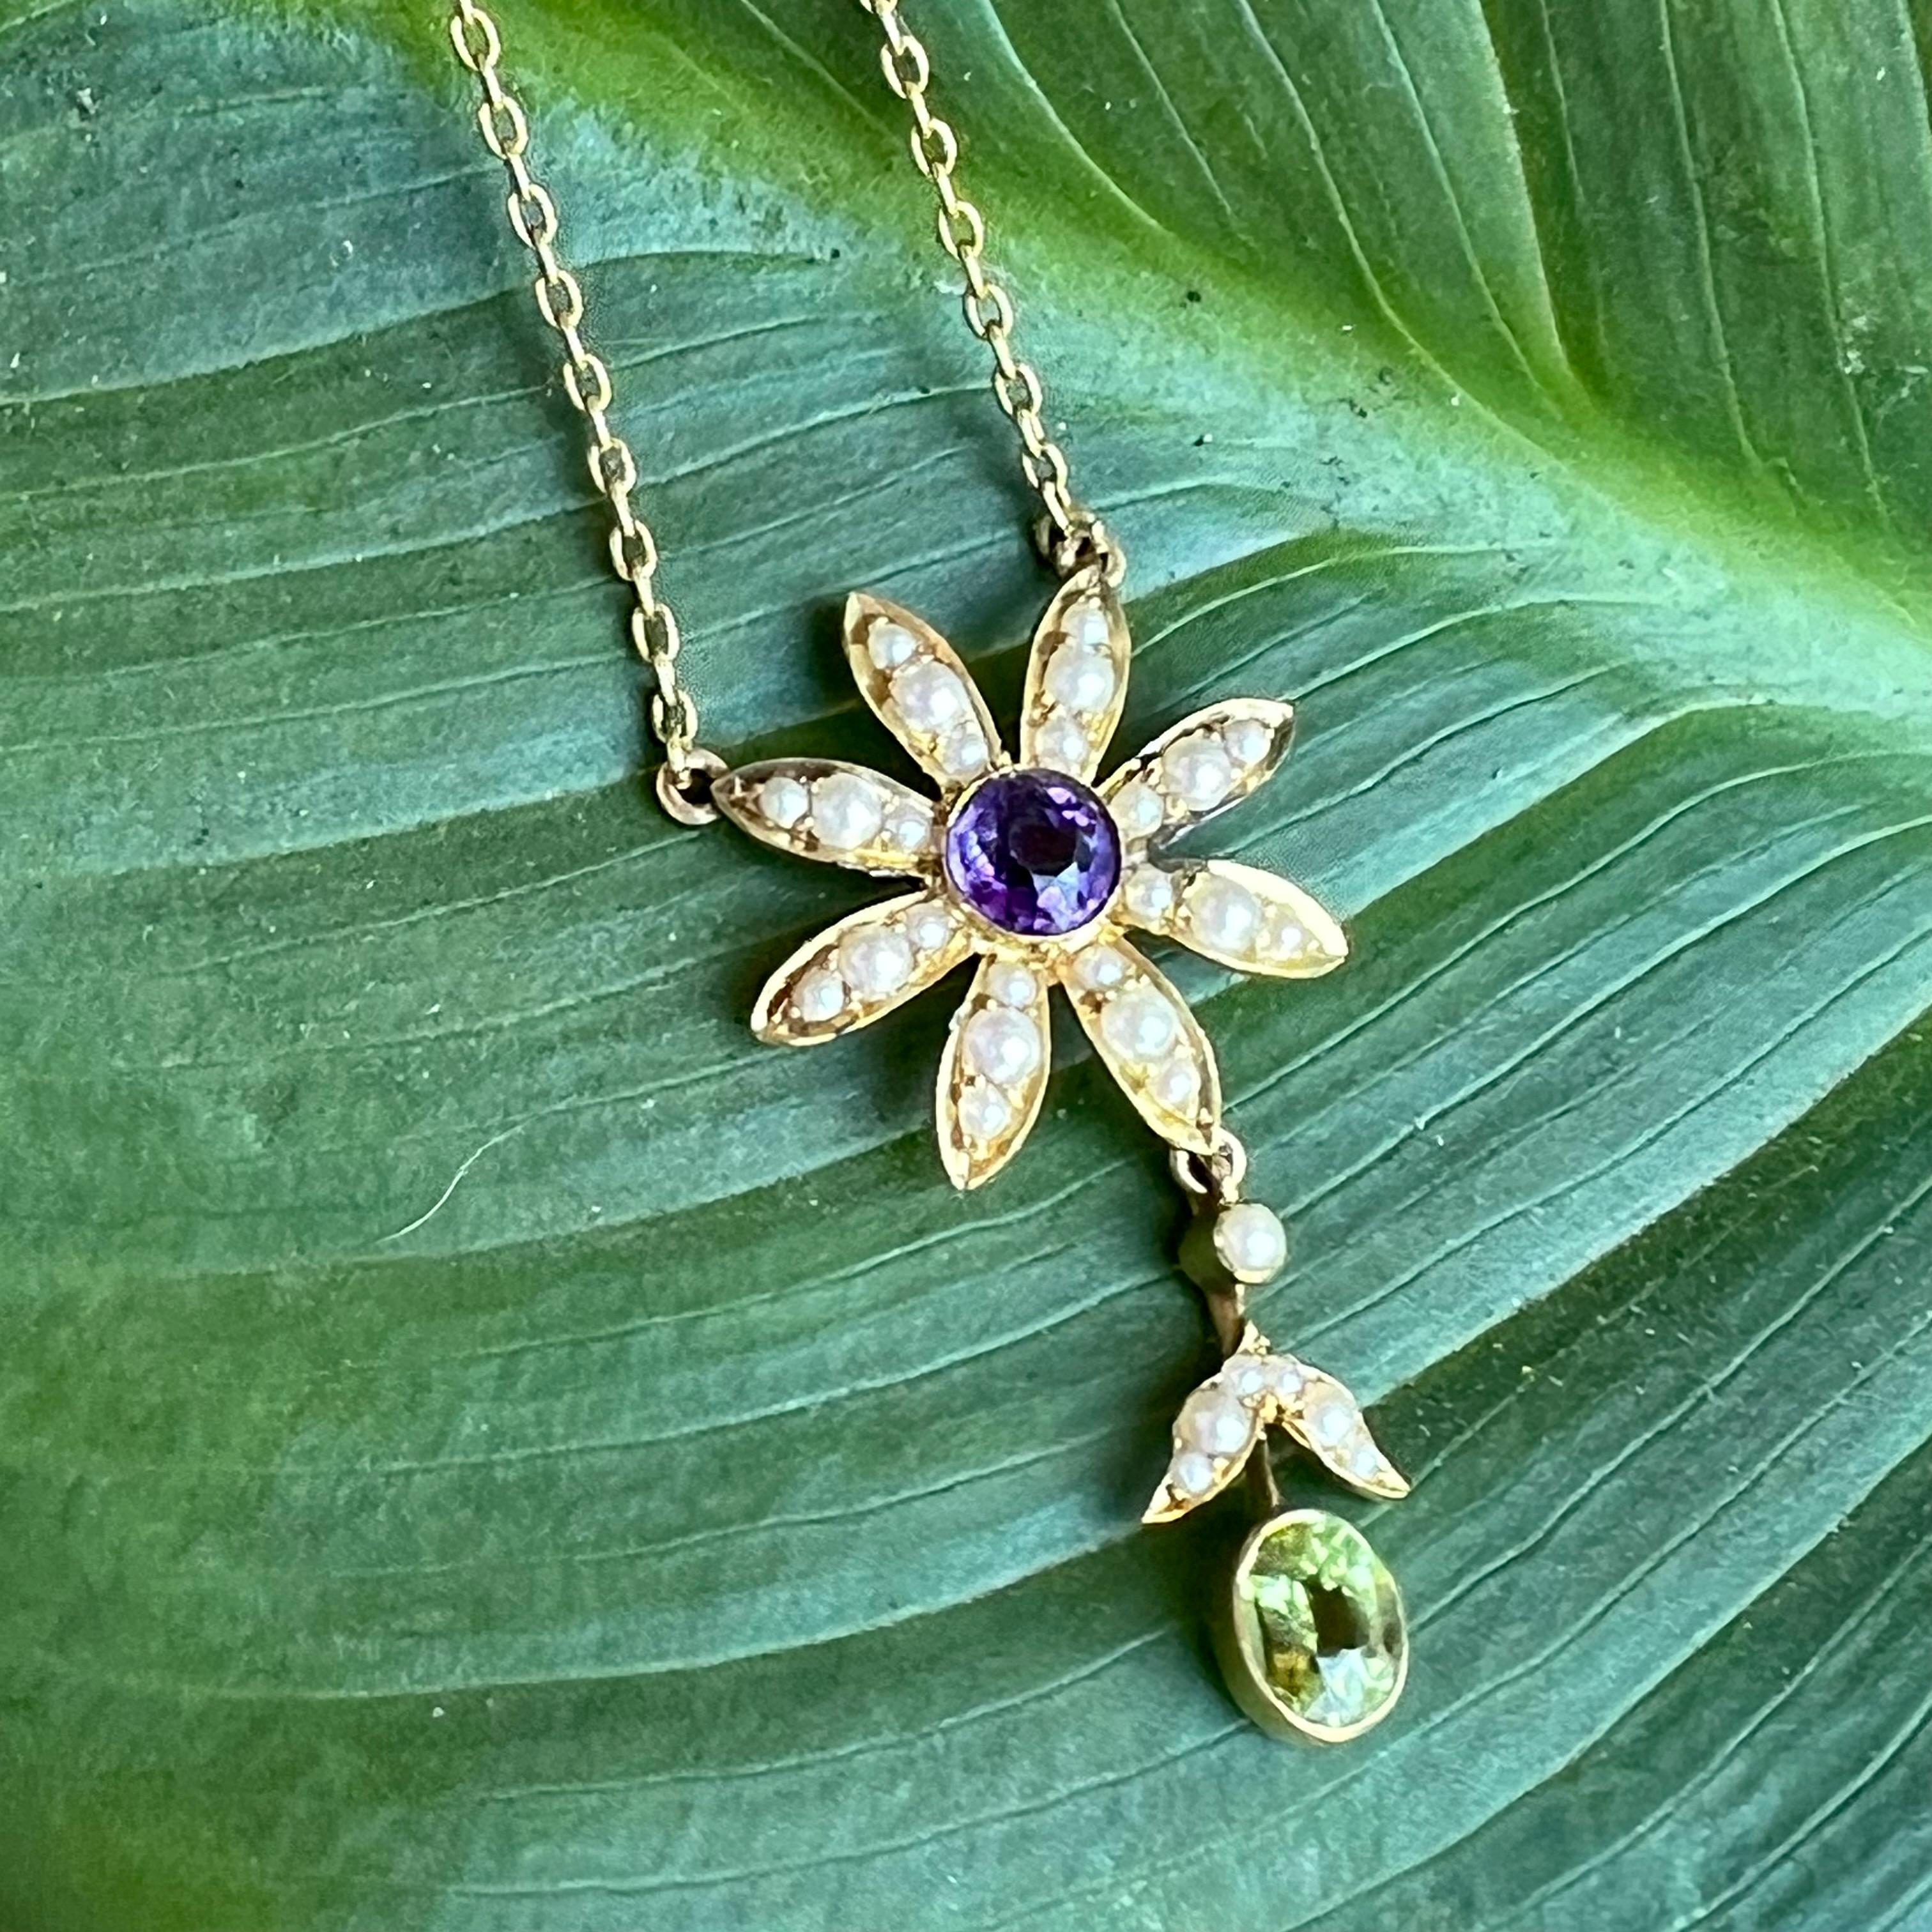 Amethyst, peridot and Pearl  15 Karat Gold Flower Pendant Necklace Circa 1900 In Excellent Condition For Sale In Berkeley, CA